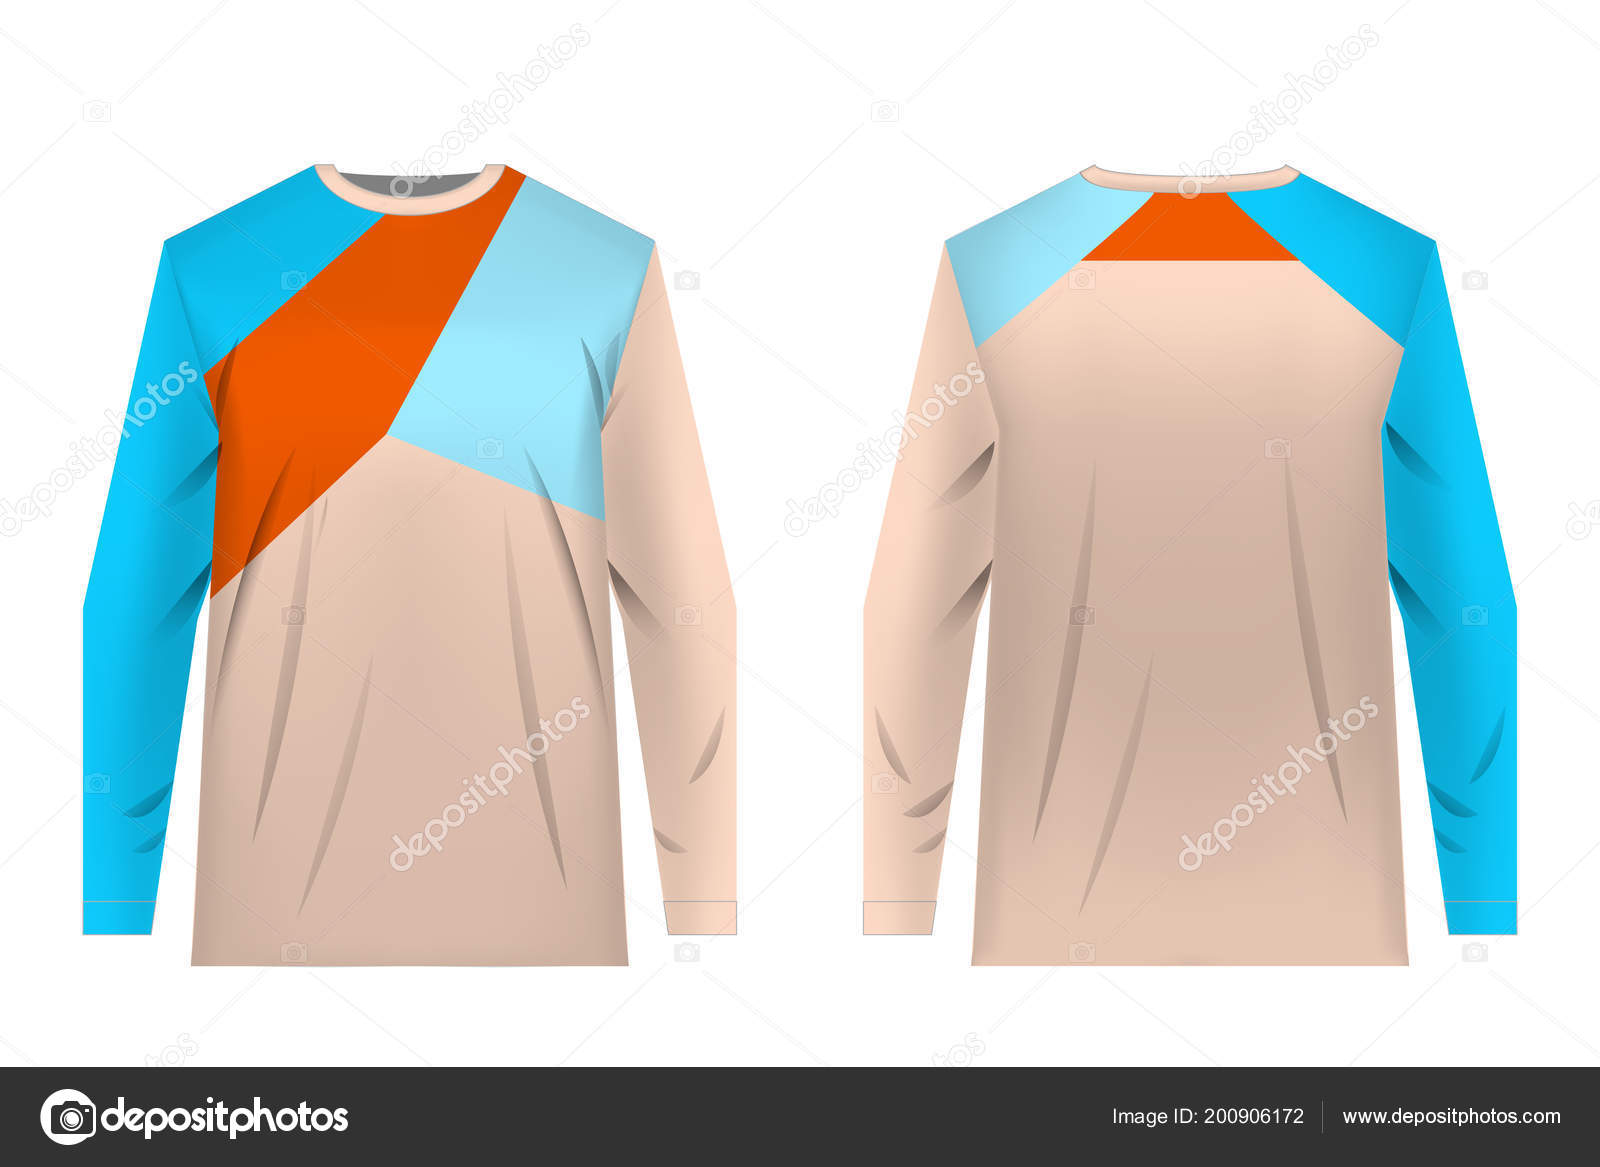 Jersey Design For Extreme Cycling. Mountain Bike Jersey. Vector